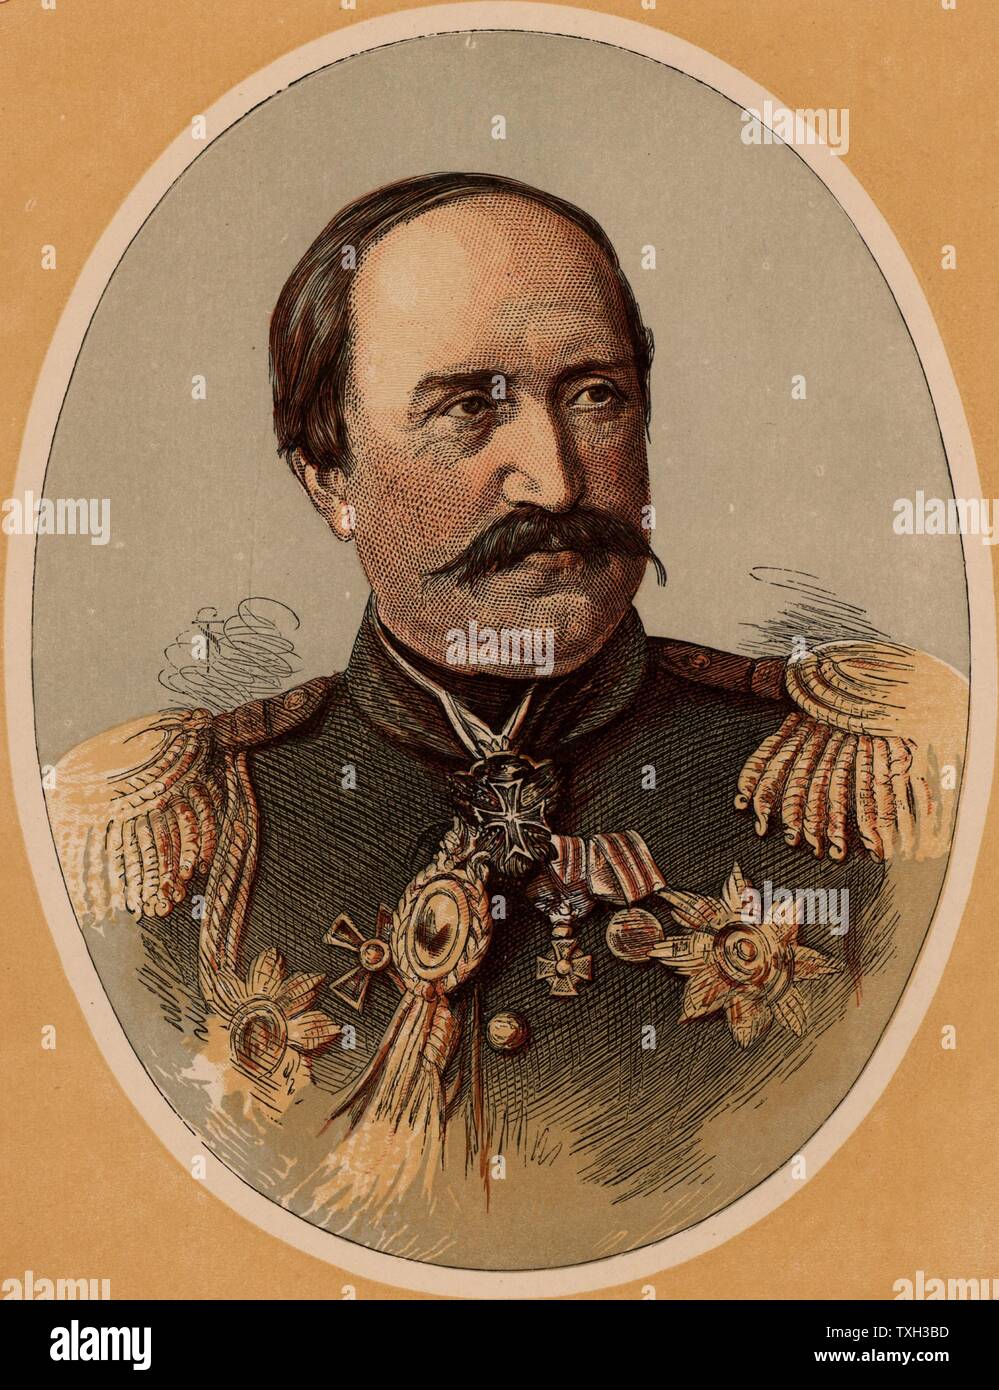 Nicholas Pavlovich Ignatiev (1832-1908) Russian soldier, diplomat and statesman, champion of pan-Slavism. In 1856 he was present at the Treaty of Paris at the end of the Crimean War.  Ambassador to Constantinople (Istanbul) 1864-1877. Minister of the Interior 1881-1882. Colour-printed wood engraving. Stock Photo